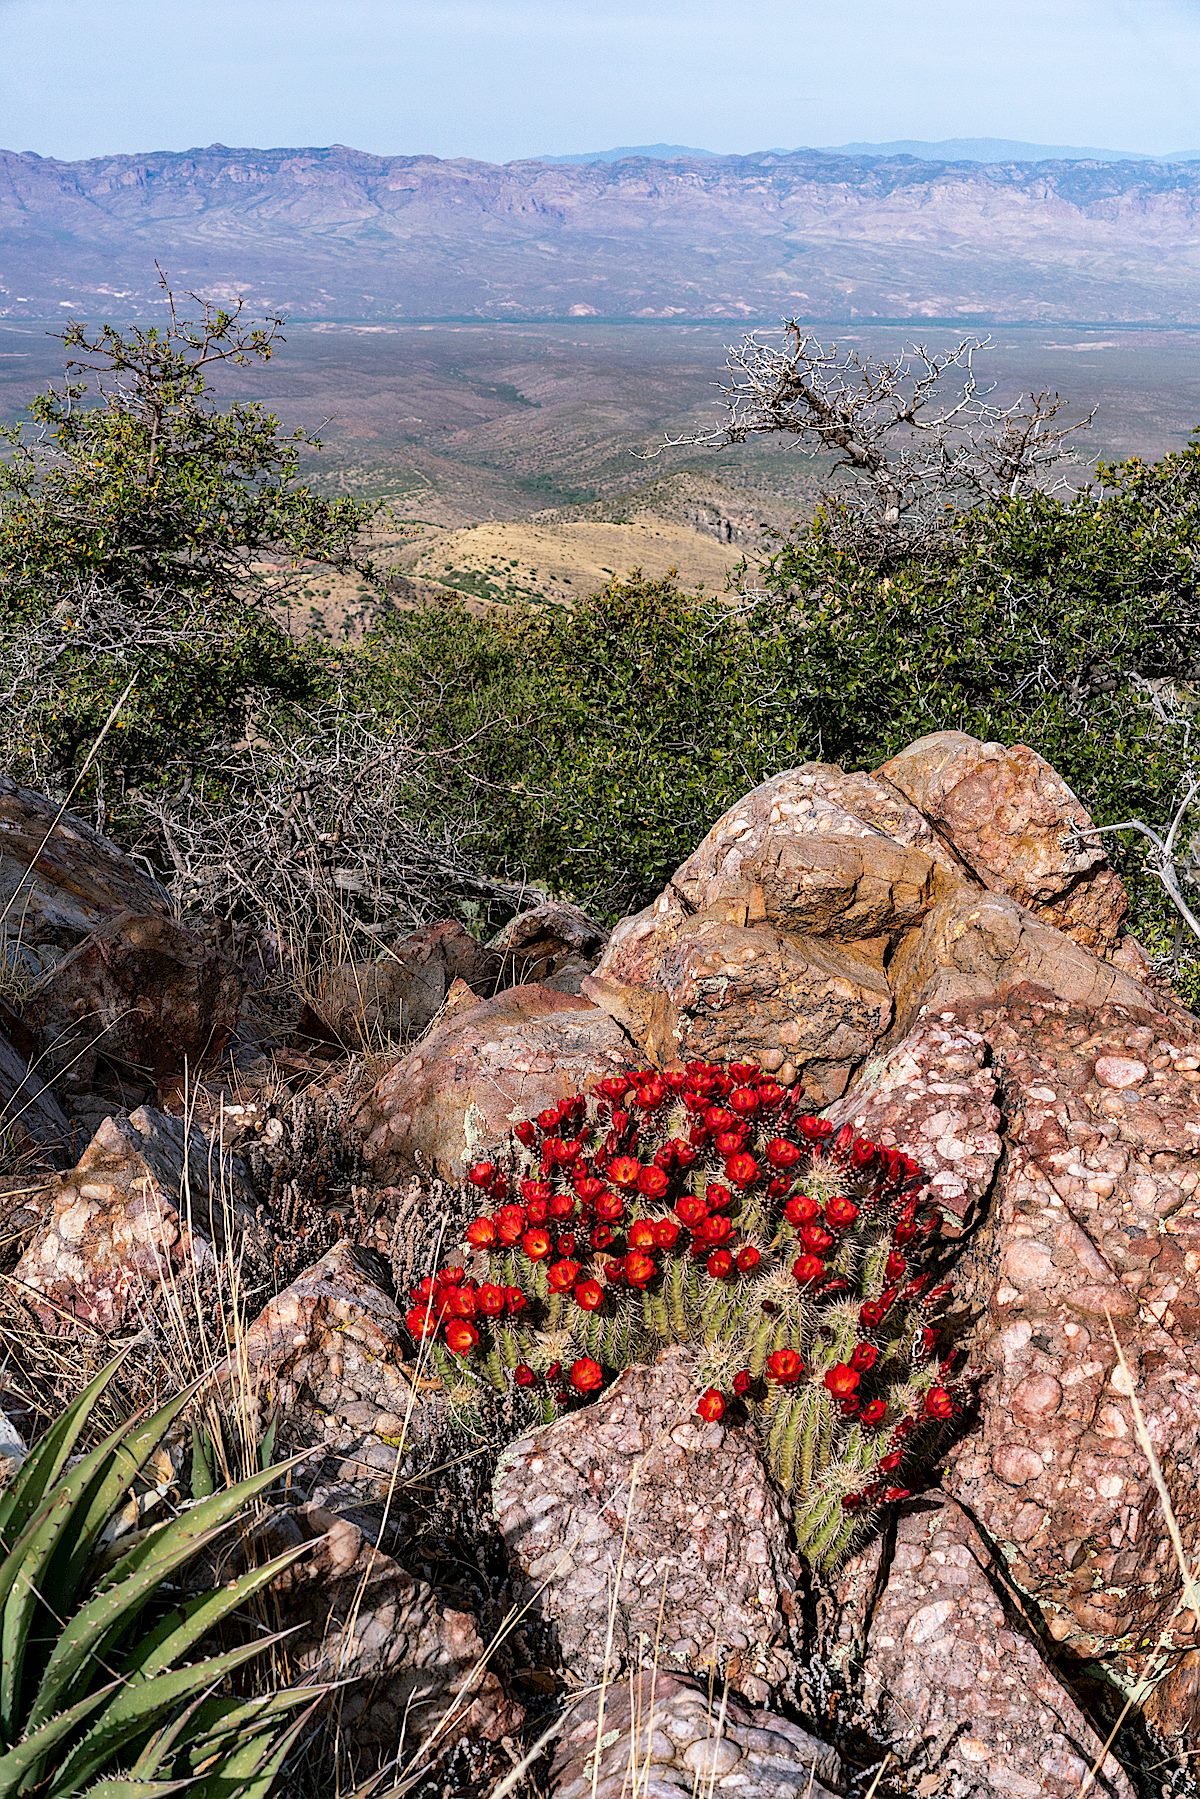 Hedgehog cactus and a view across the San Pedro River Valley from a high point off FR4475. April 2018.